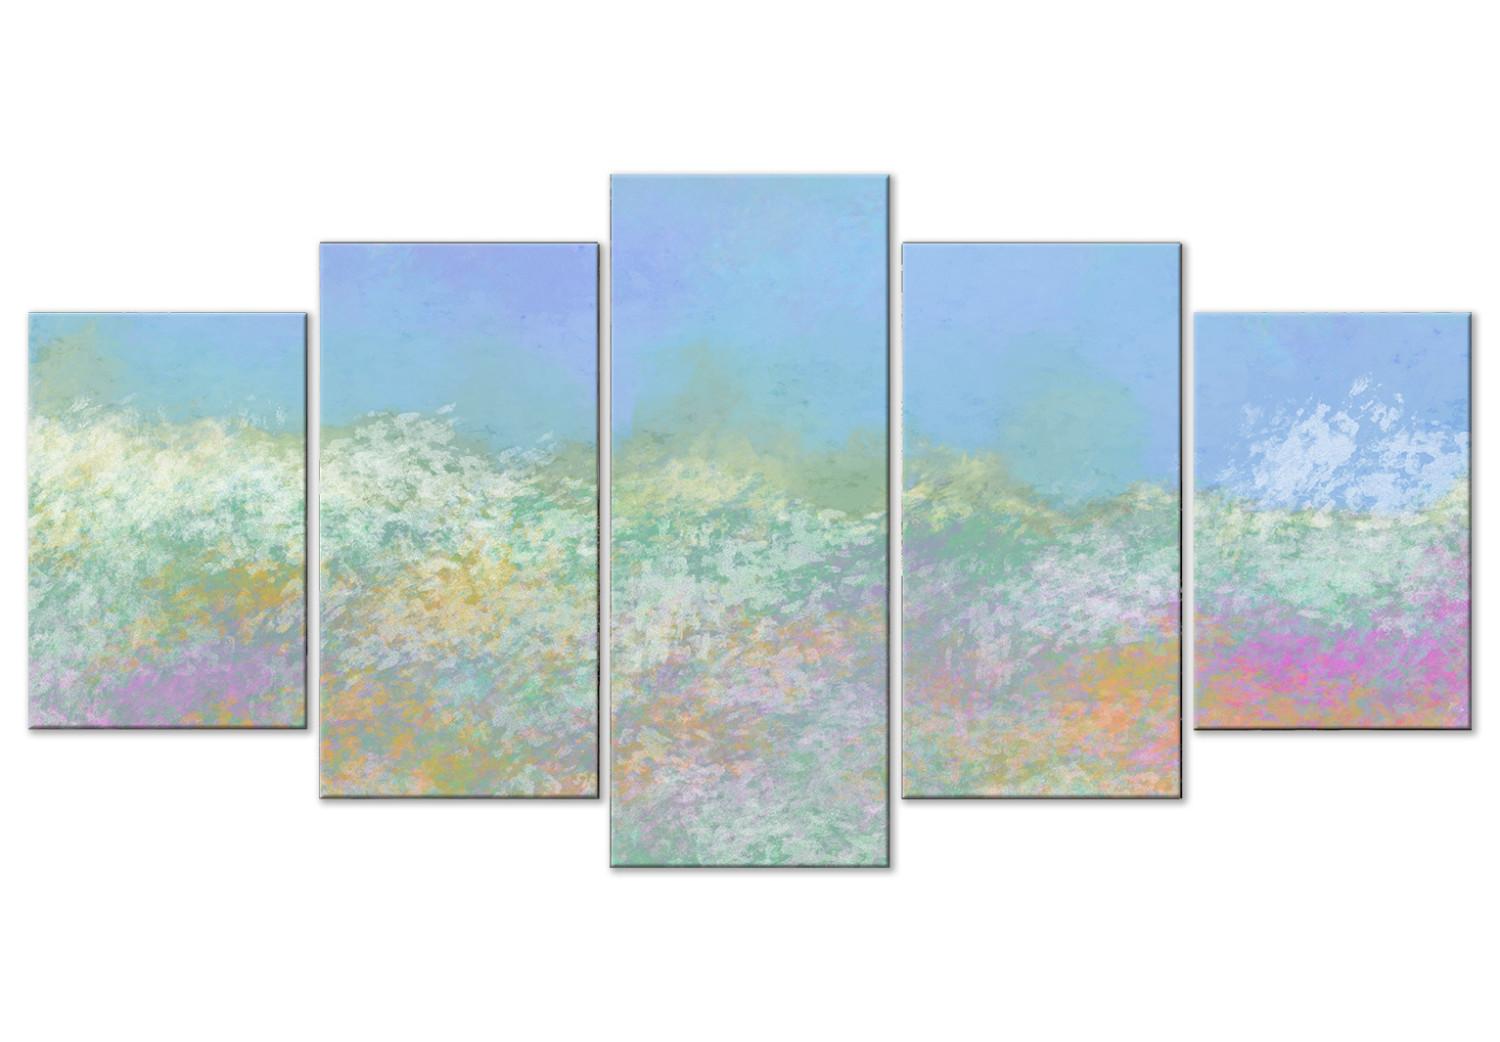 Canvas Meadow in Summertime (5-piece) Wide - abstraction in colorful flowers